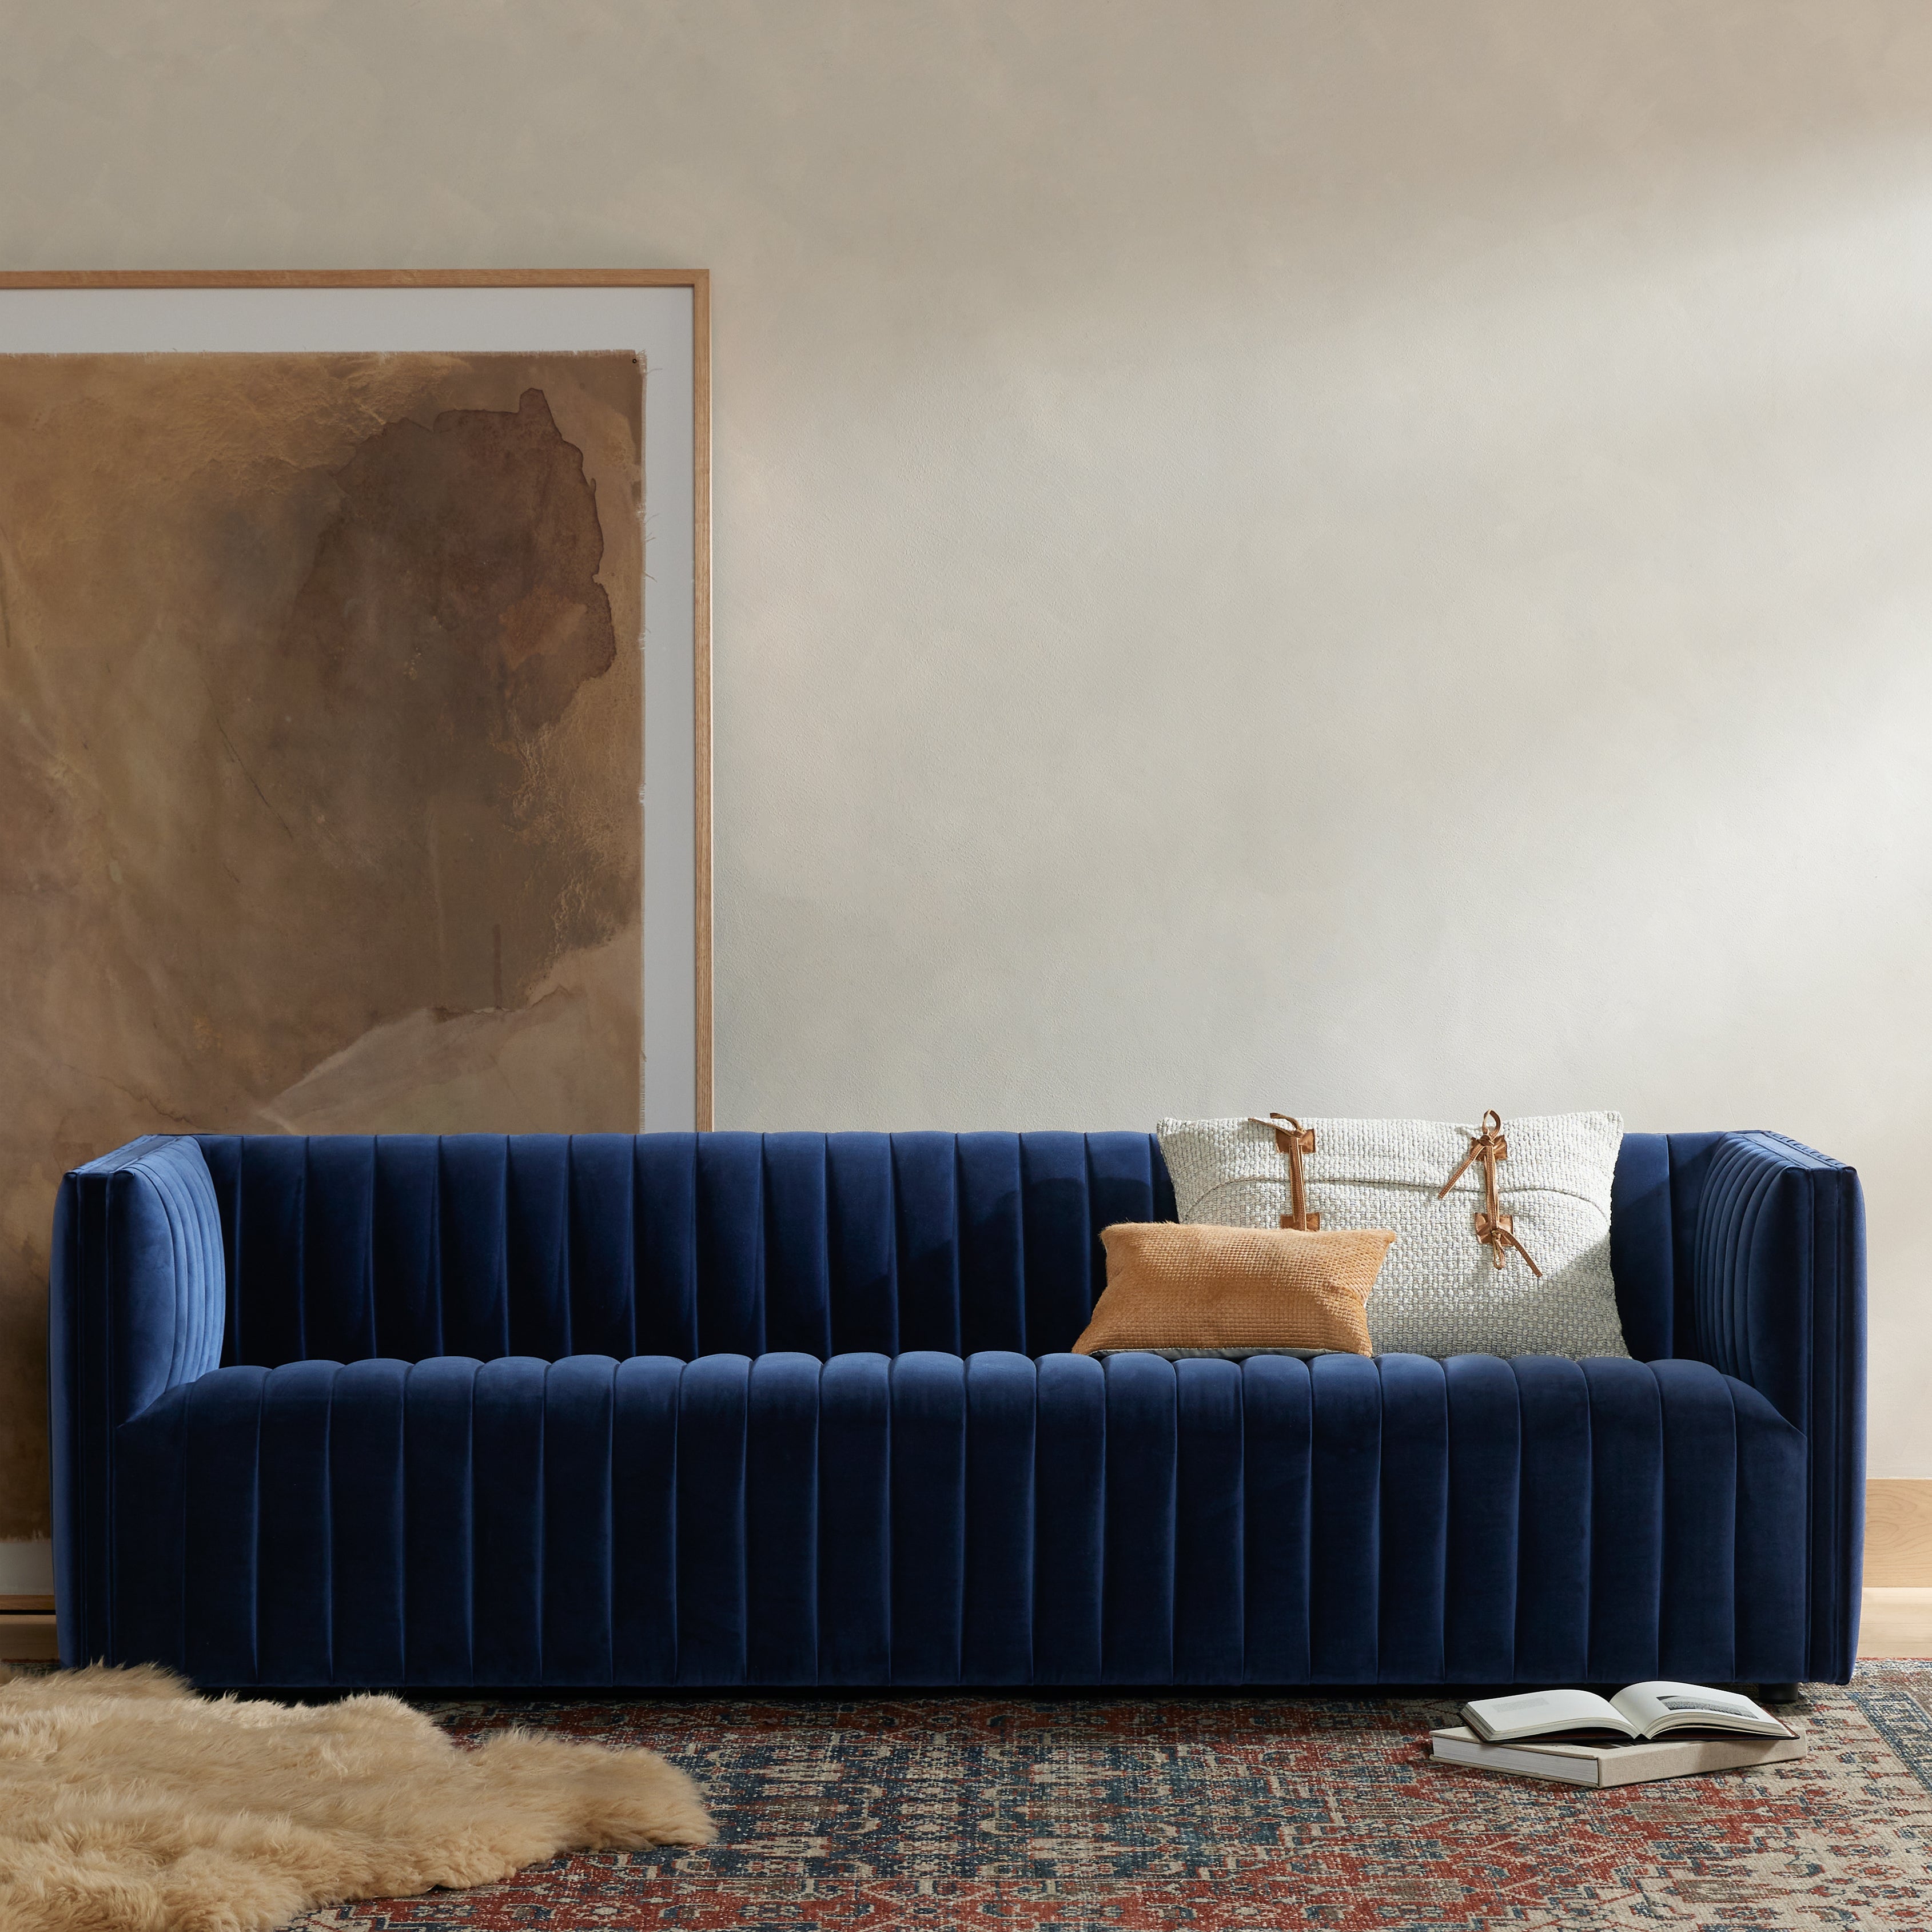 Velvety poly-blend seating takes on dramatic channeling and rich navy hue for trend-forward texture and sumptuous sit. Amethyst Home provides interior design, new construction, custom furniture, and area rugs in the Seattle metro area.